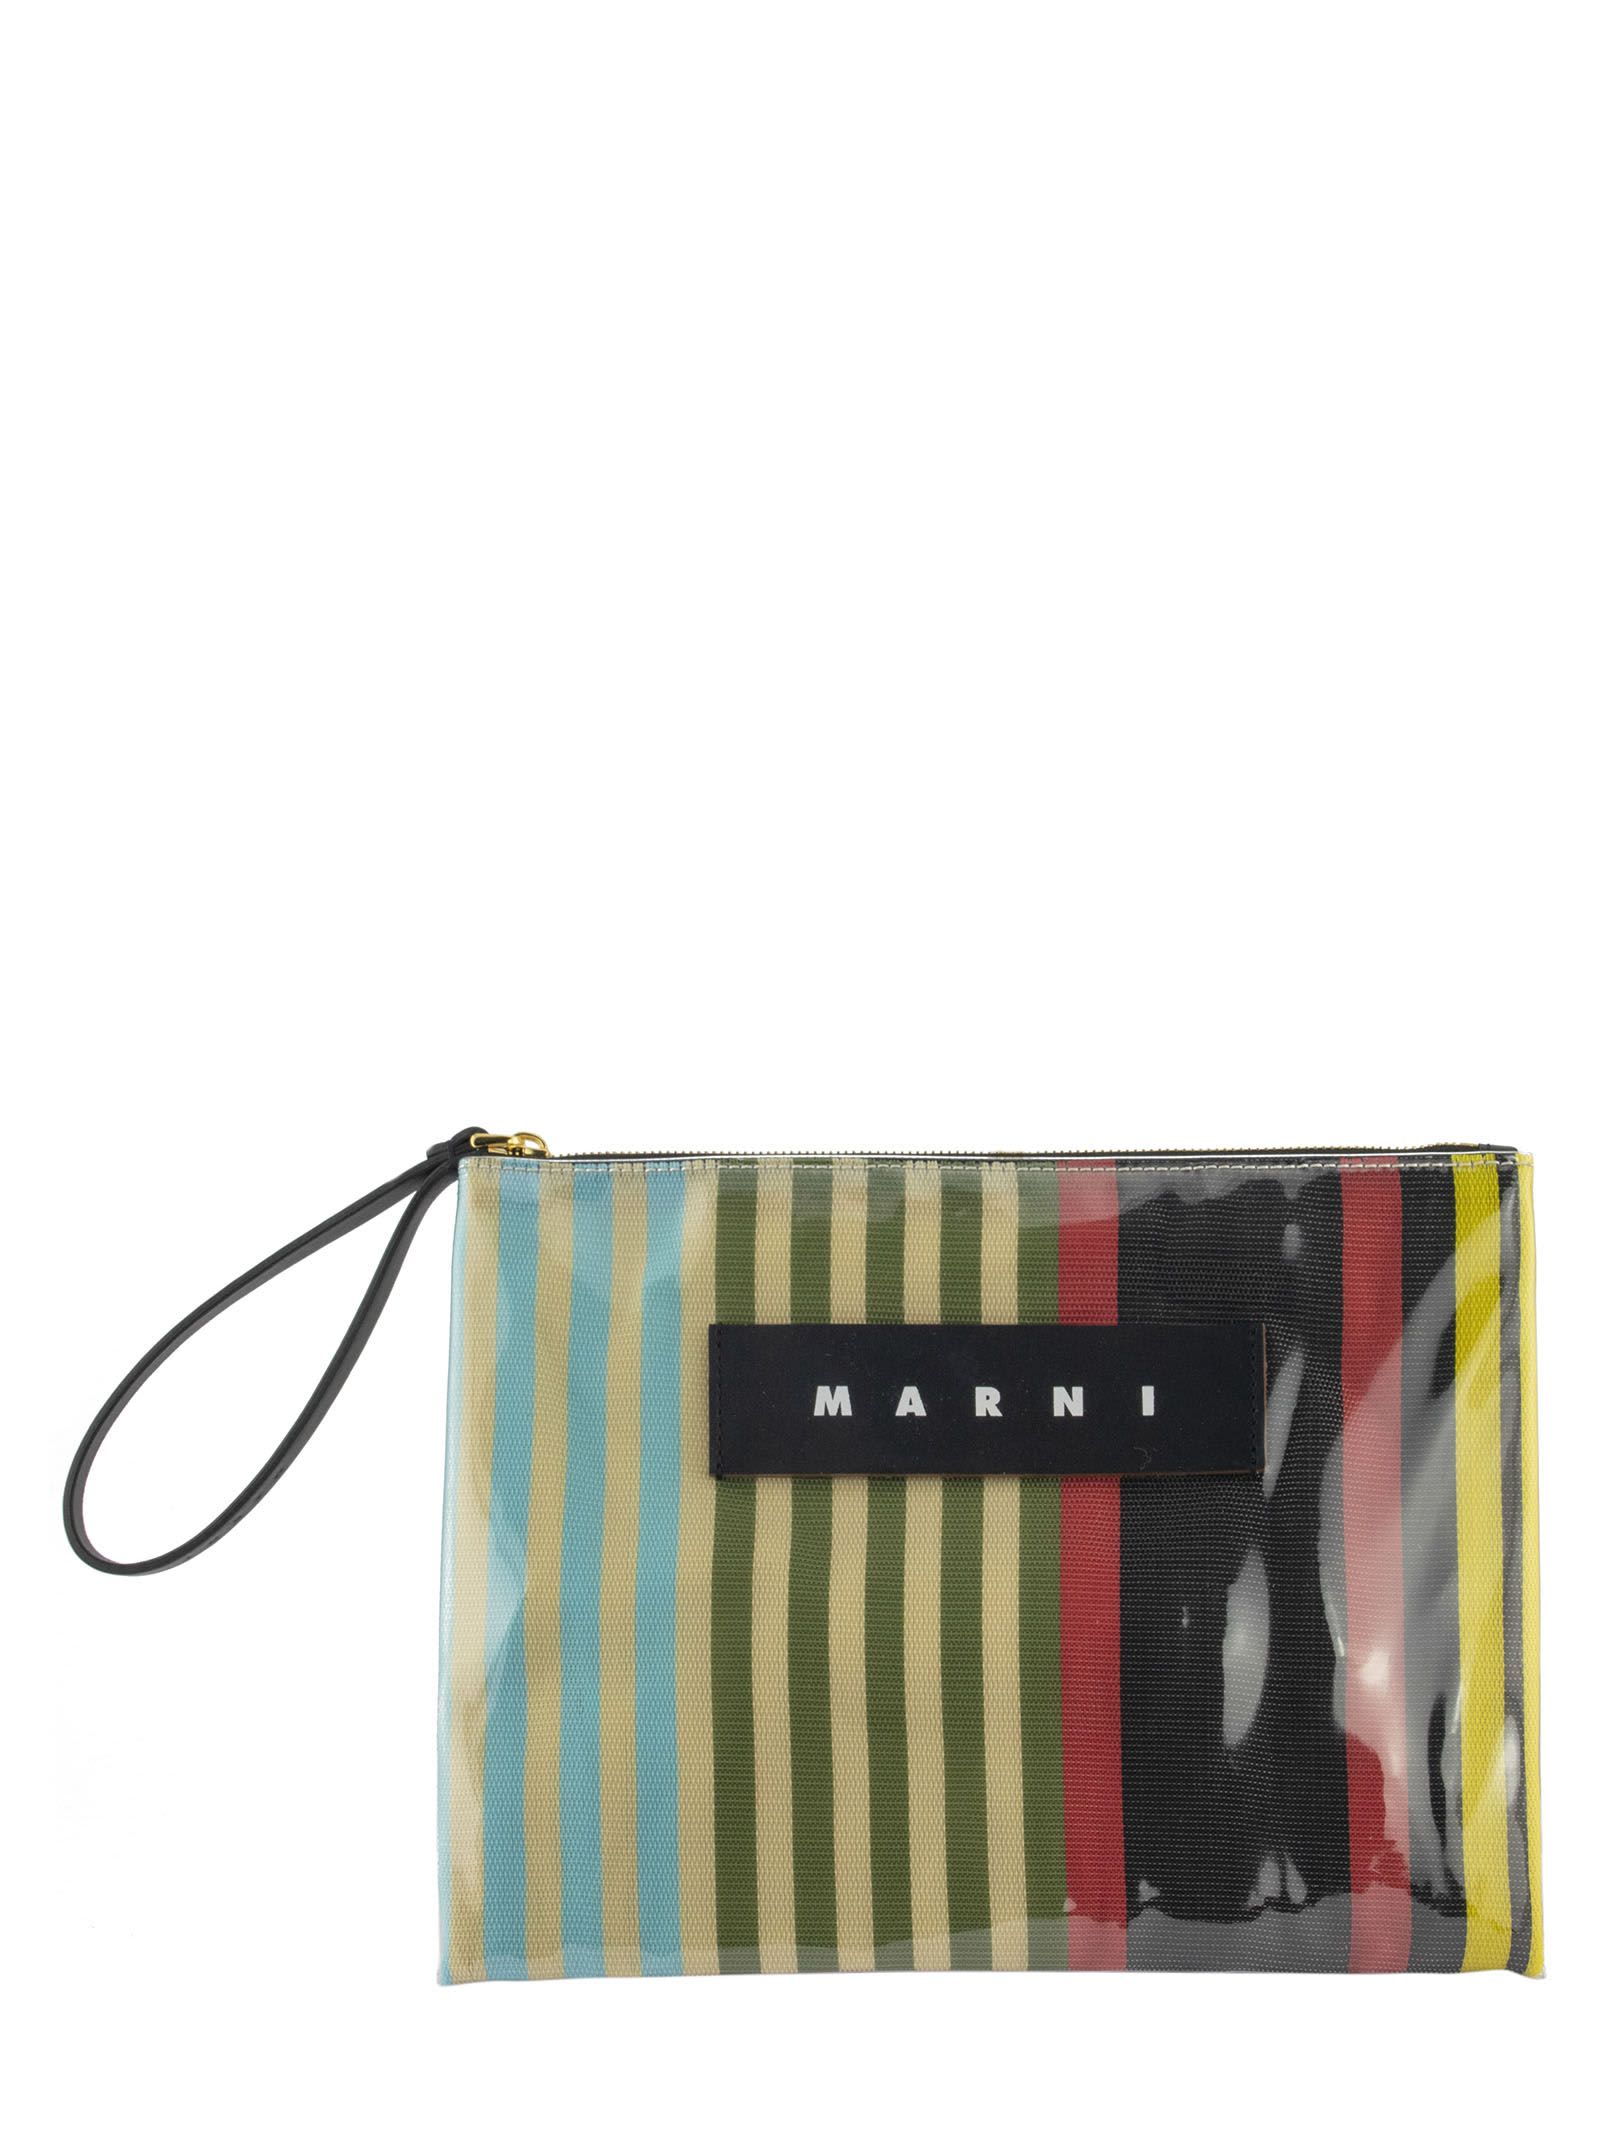 MARNI GLOSSY GRIP CLUTCH IN STRIPED POLYAMIDE YELLOW GREEN AND TURQUOISE,11219759